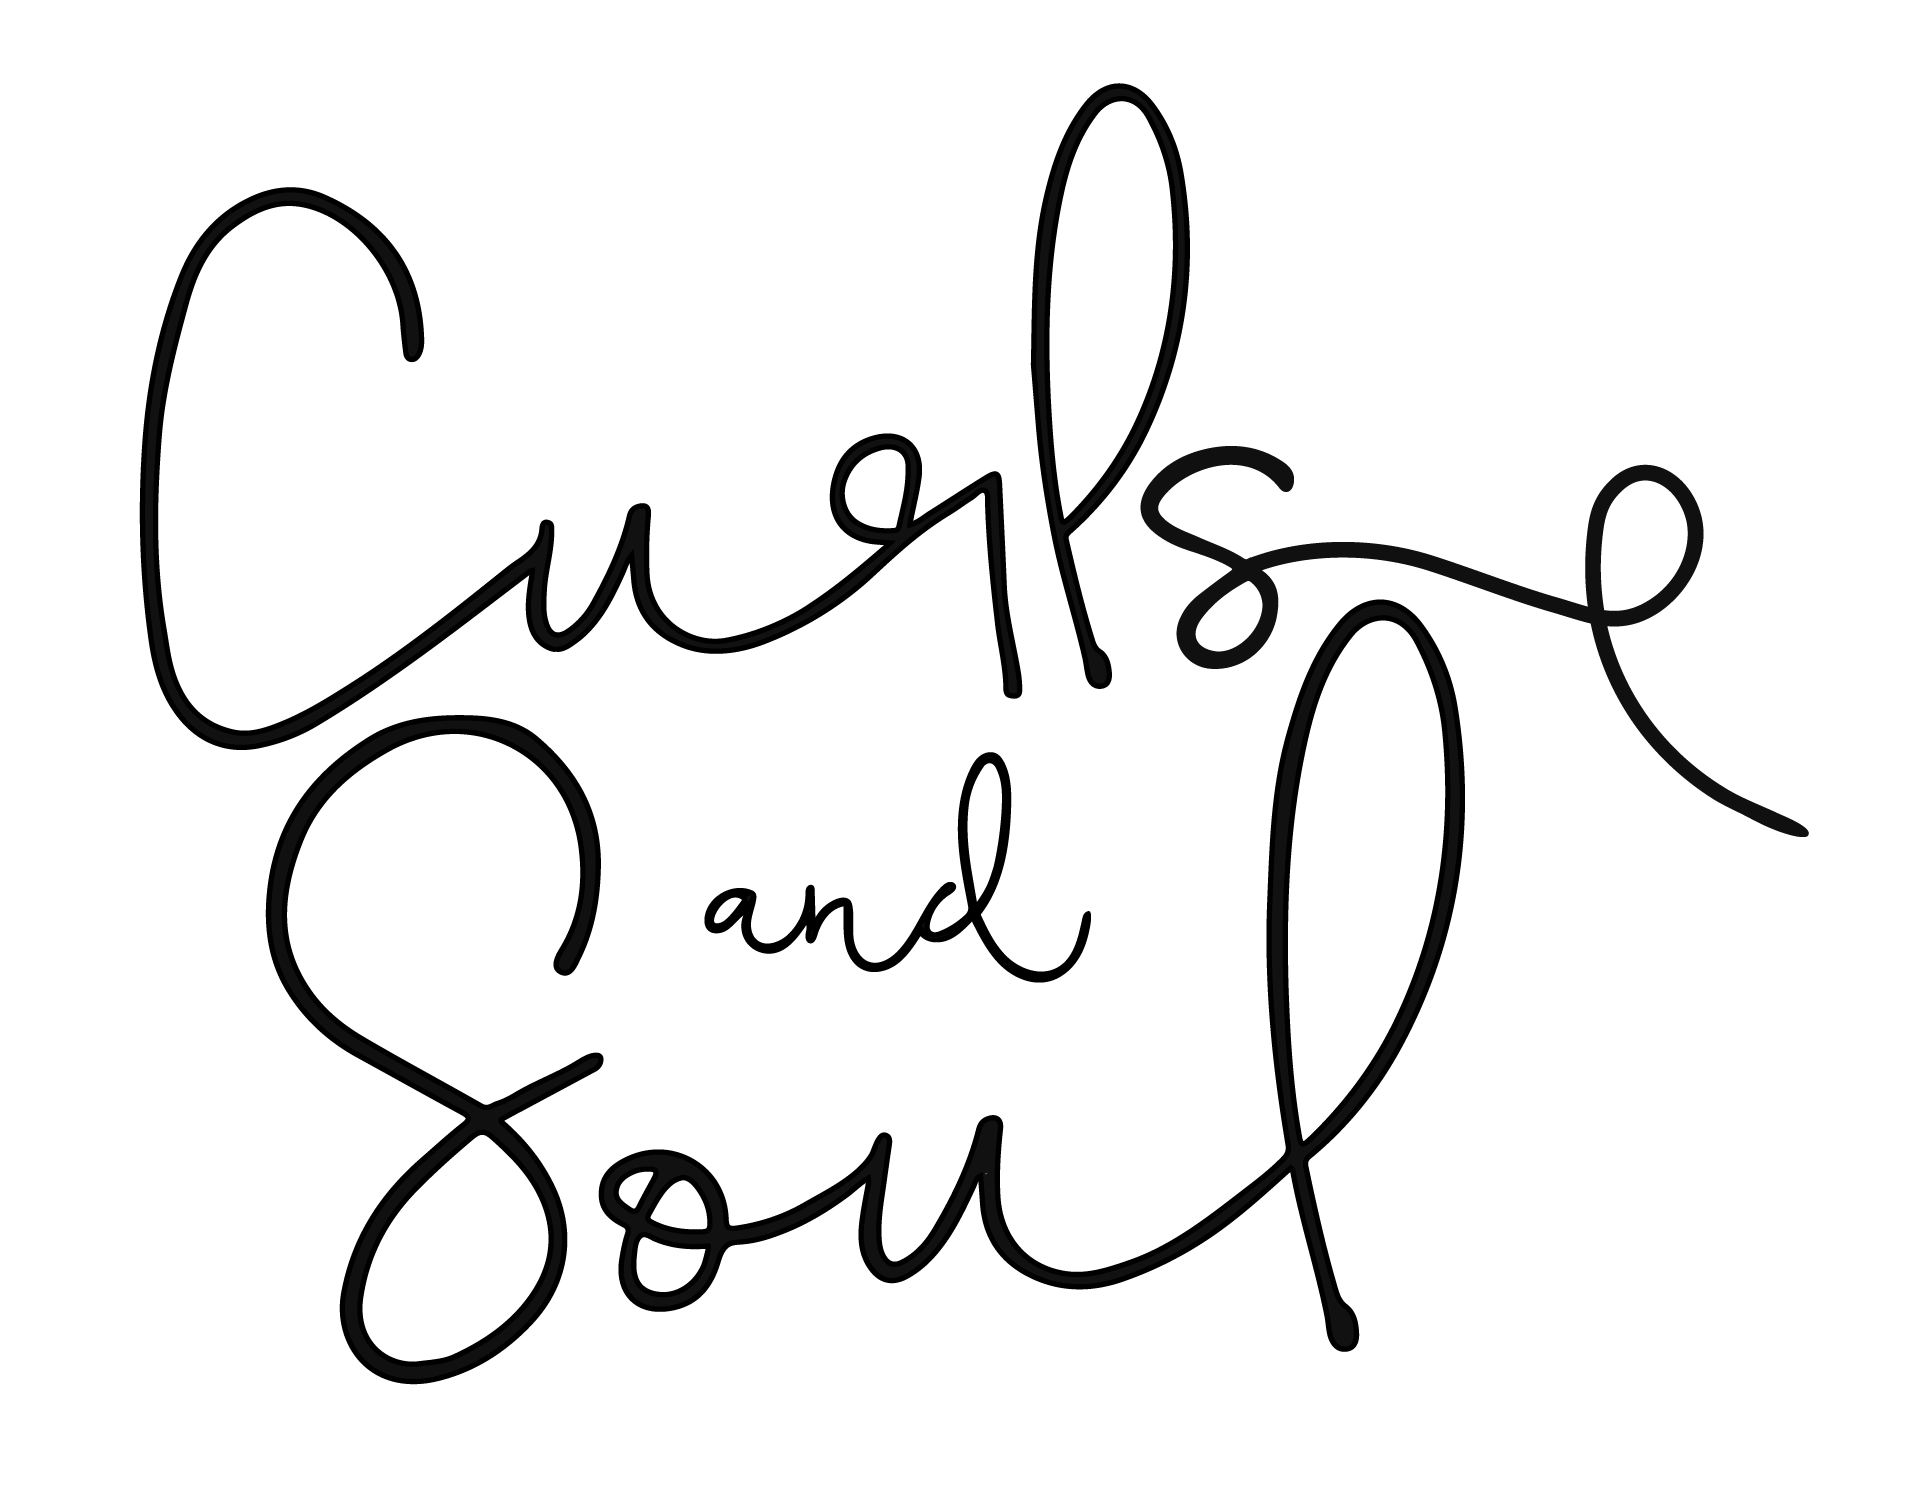 CURLS AND SOUL